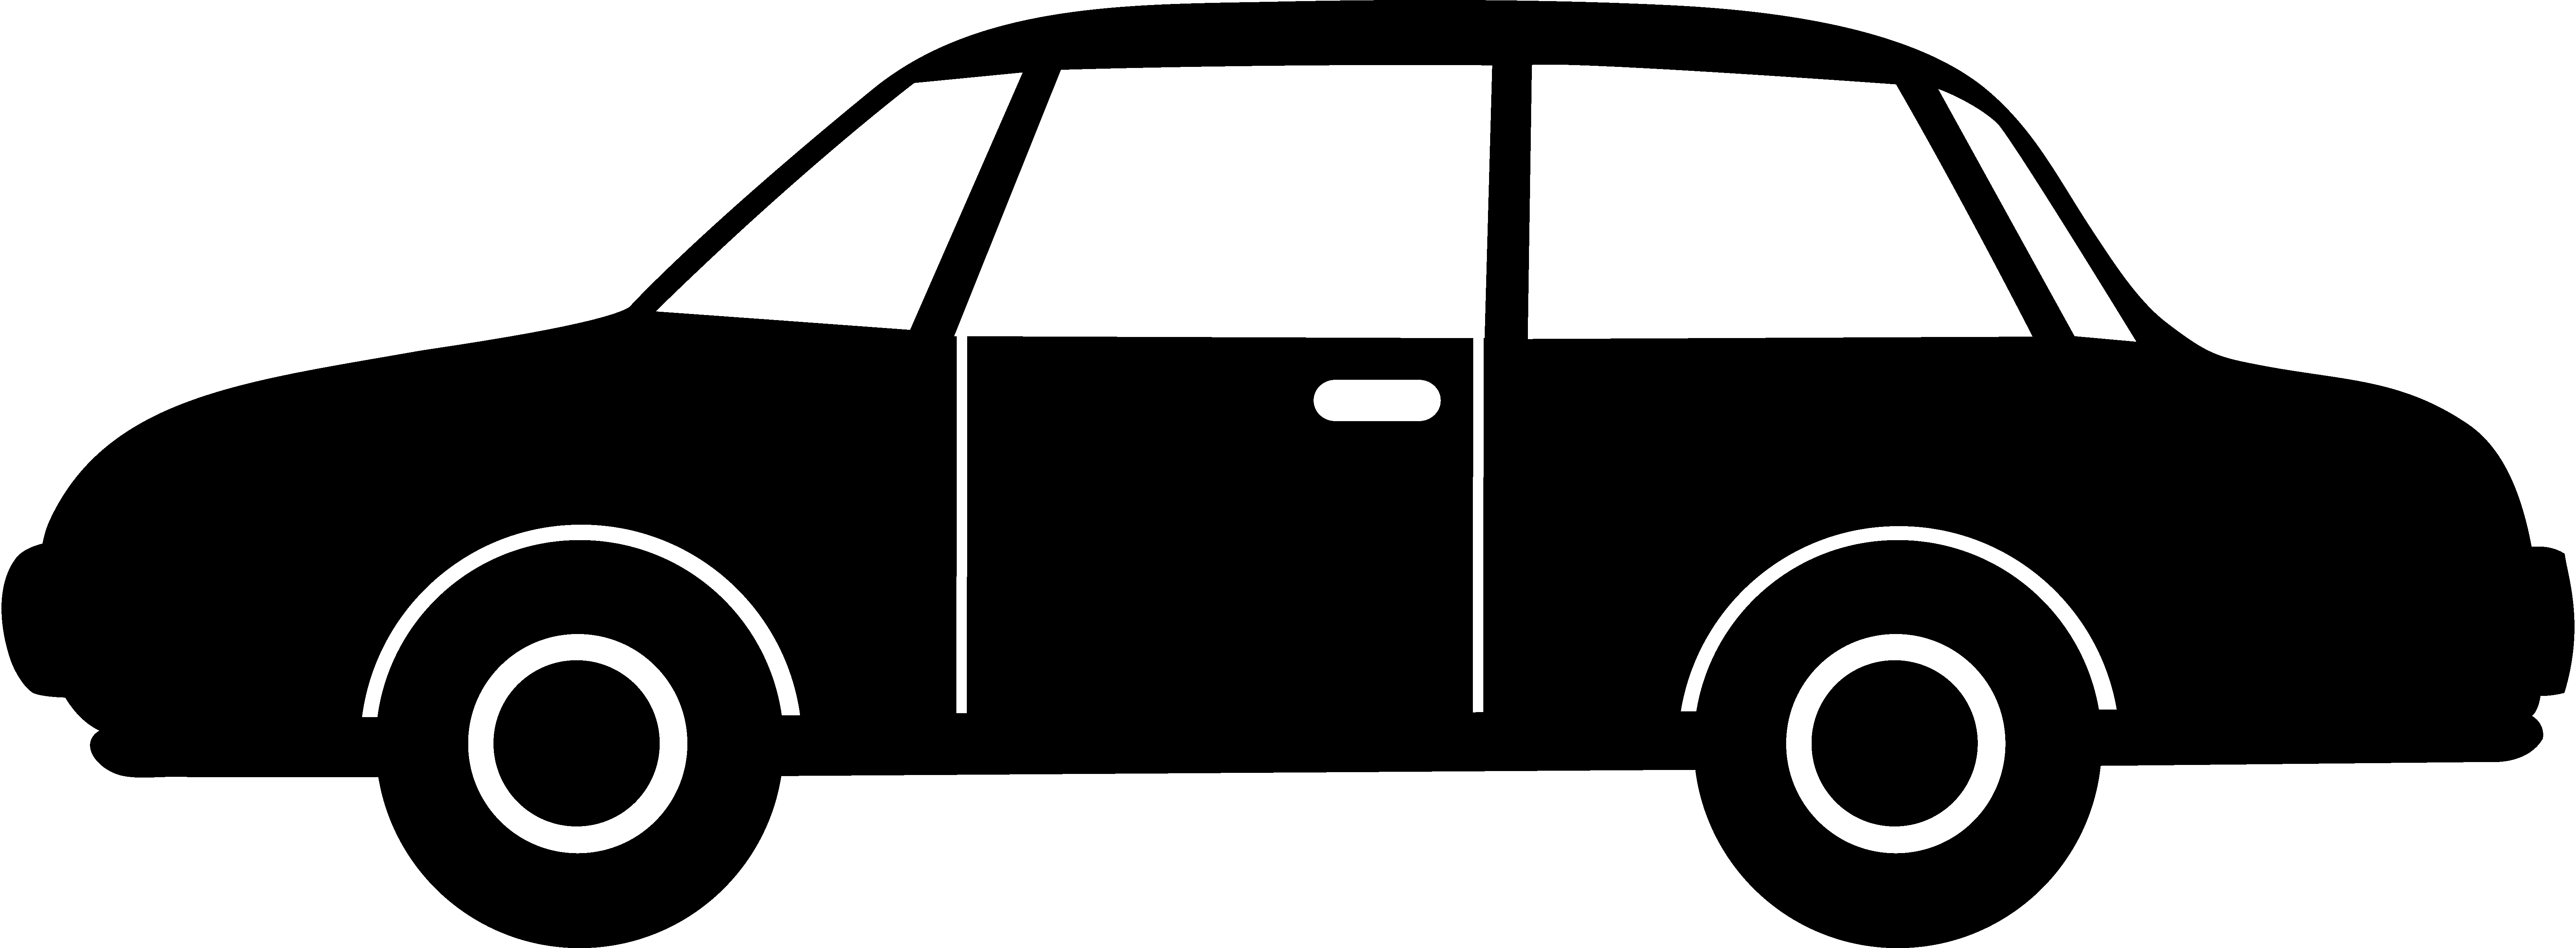 free black and white truck clipart - photo #37